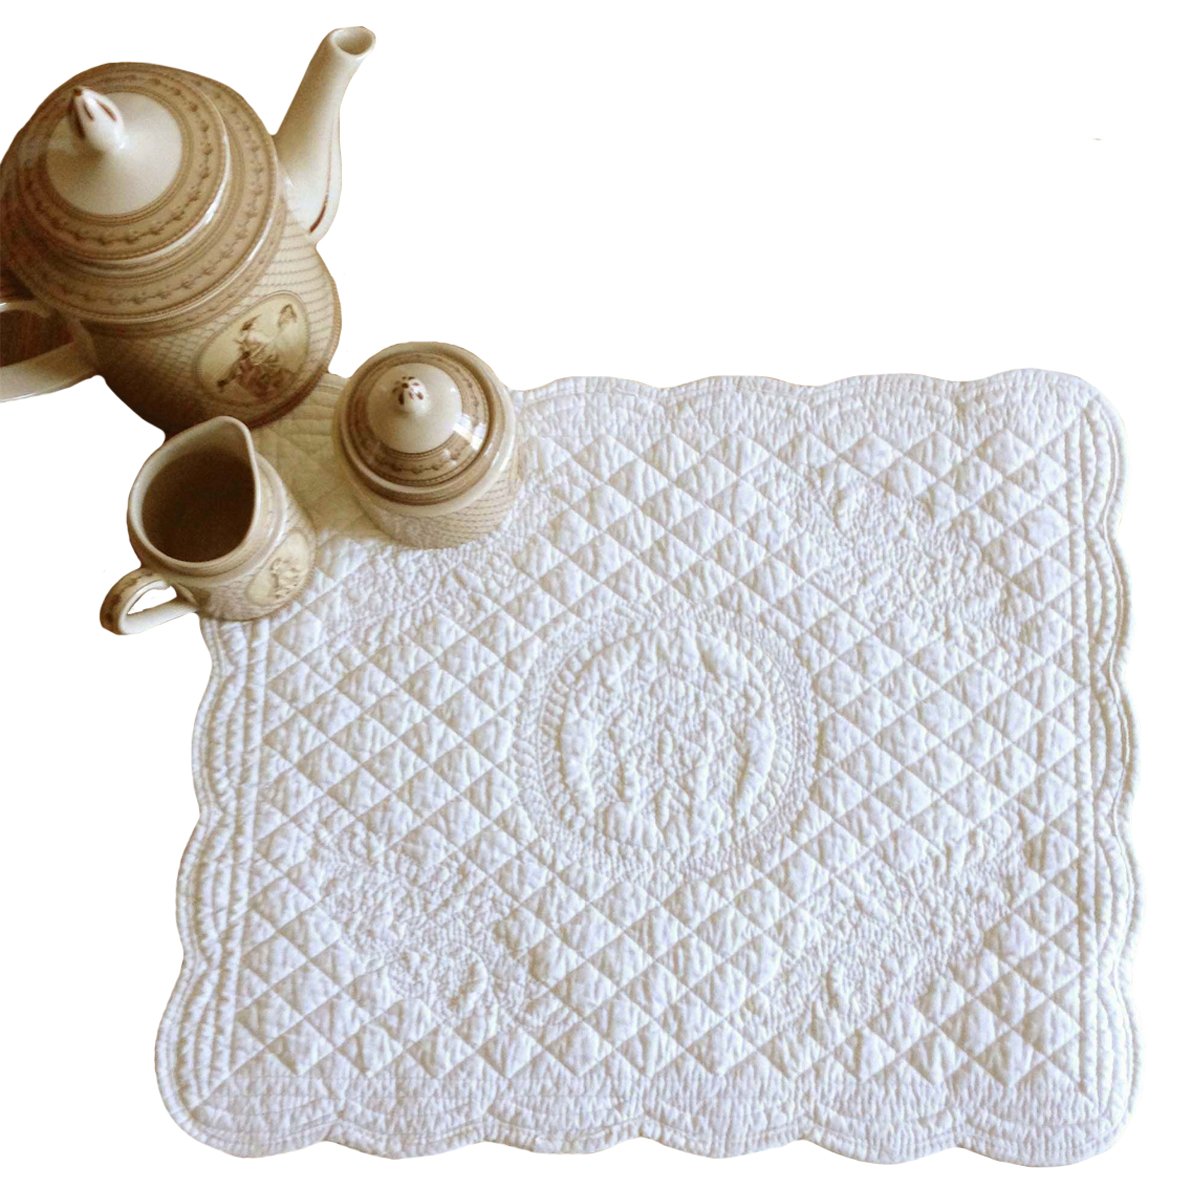 Cotton Fabric Placemats in Ivory - Set of 4 - Notbrand